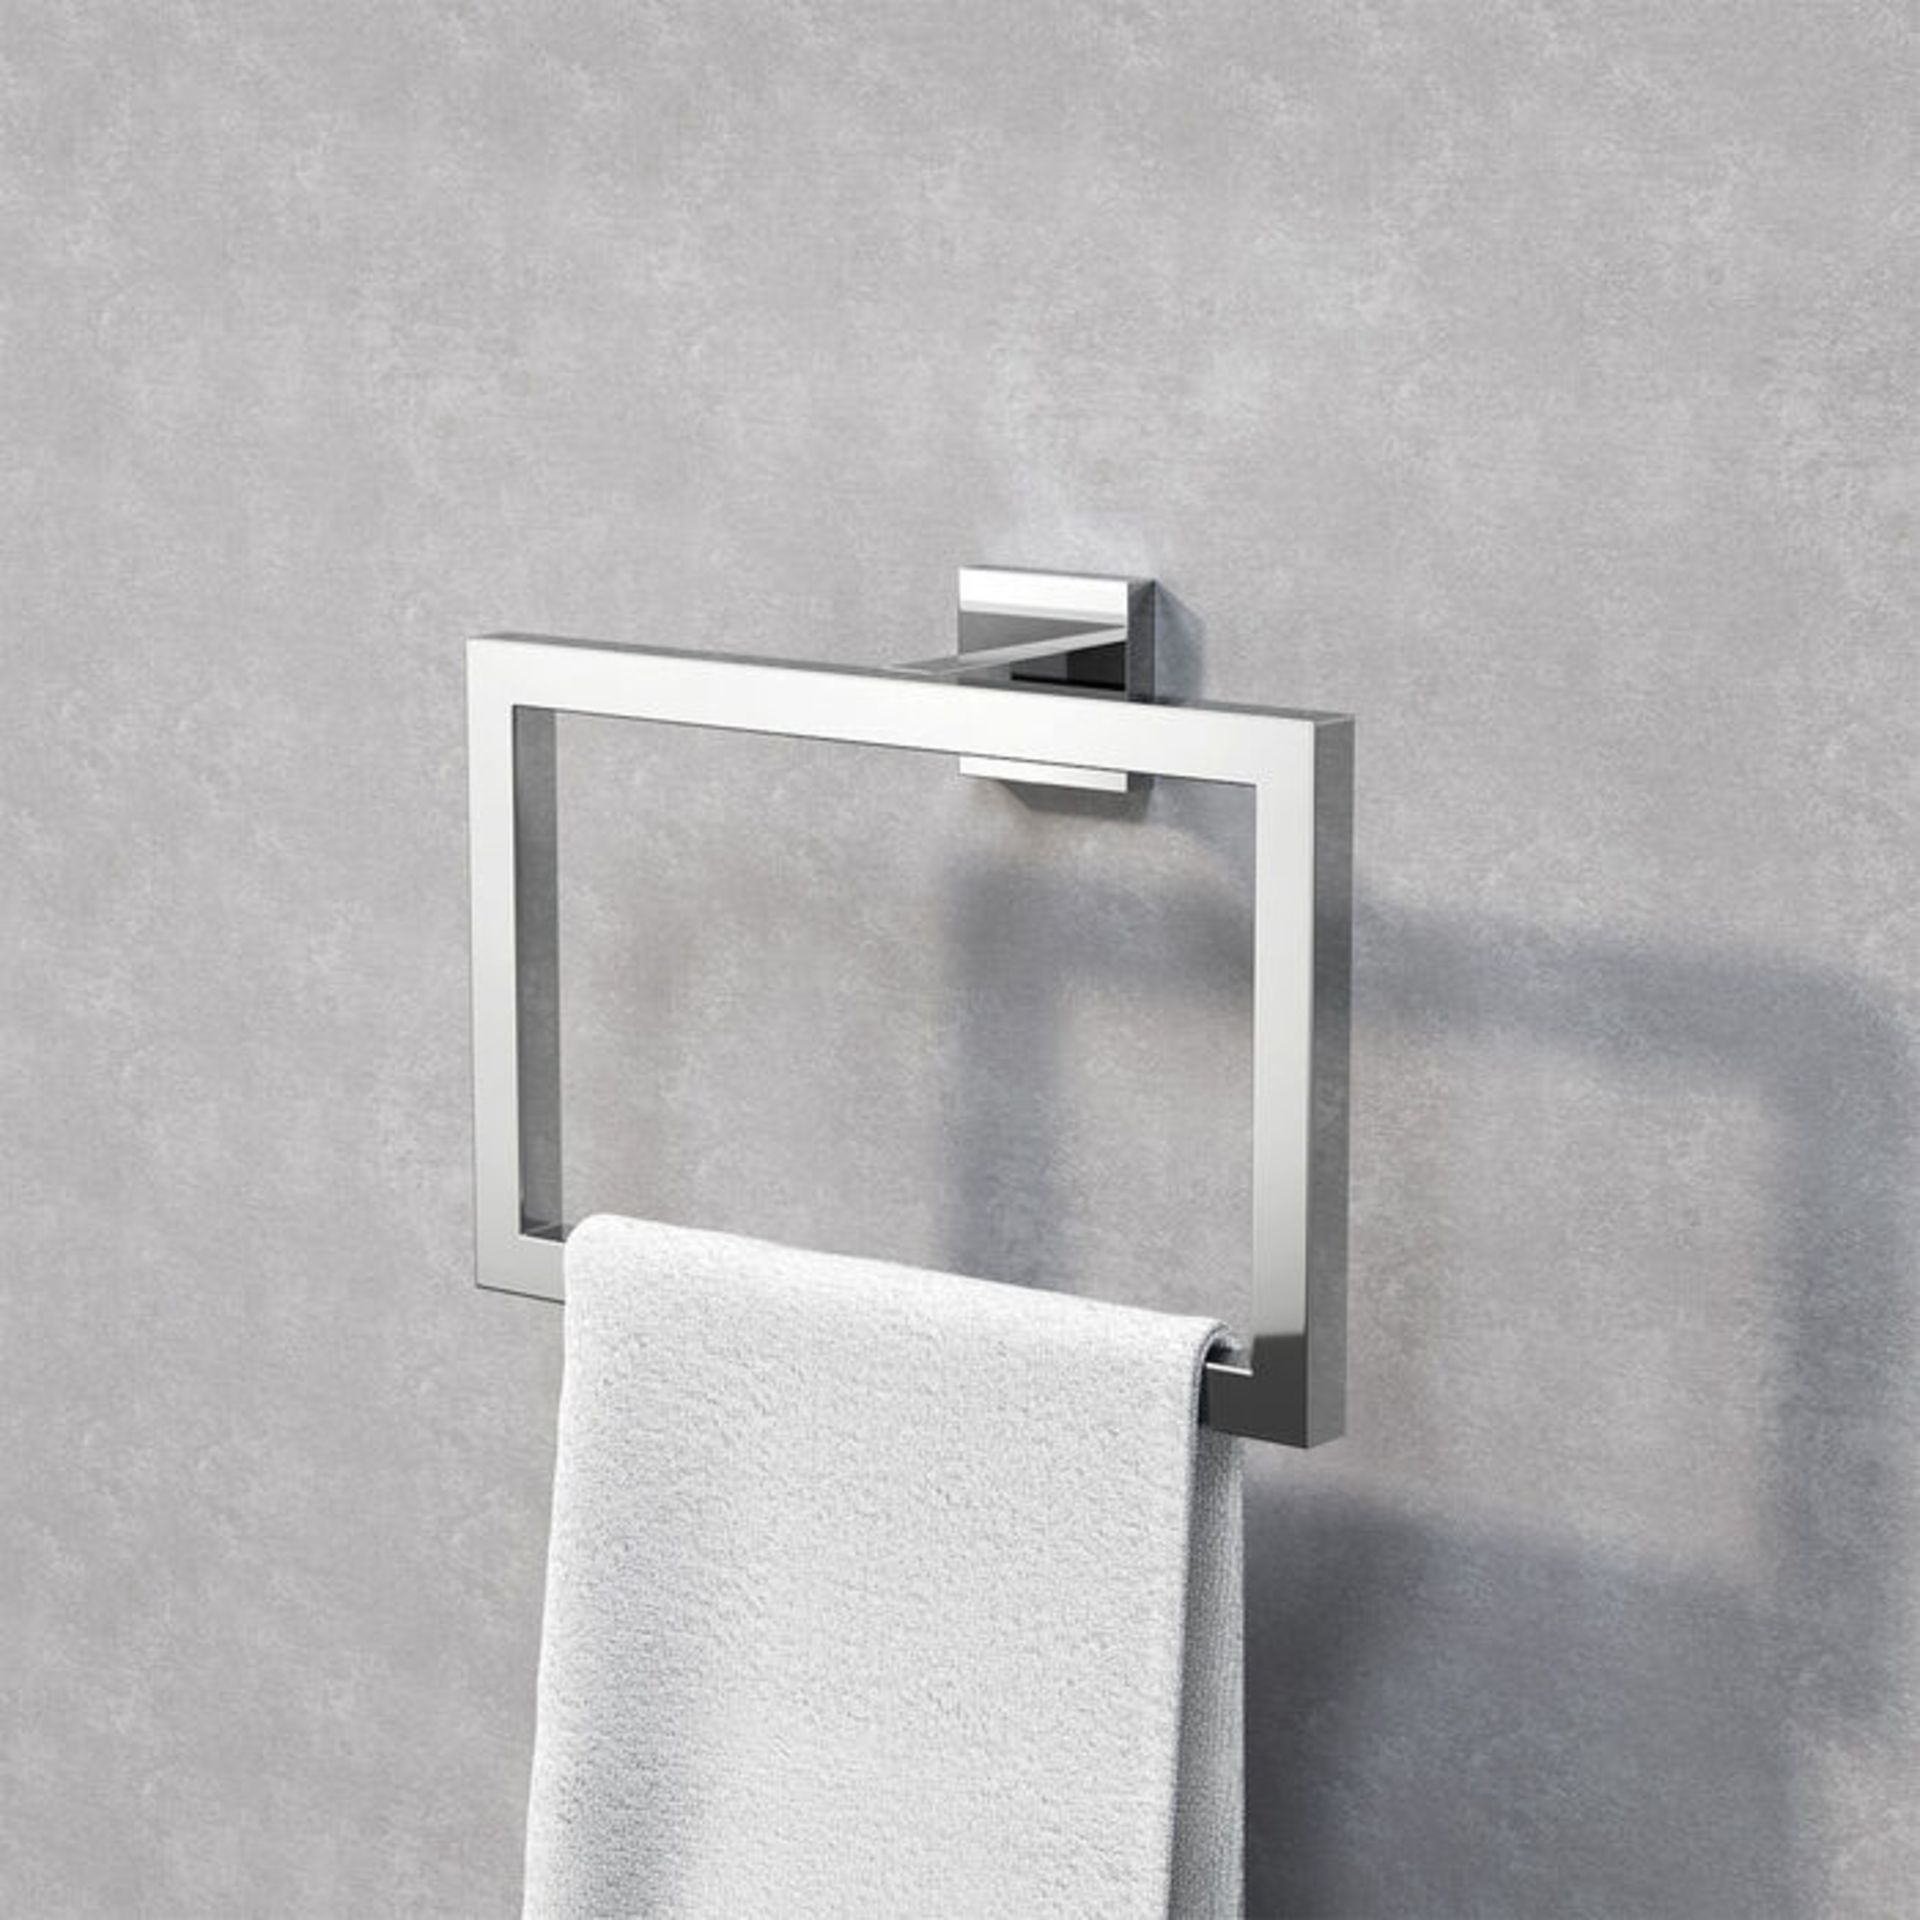 (SH1024) Jesmond Towel Ring. Finishes your bathroom with a little extra functionality and style... - Image 2 of 3